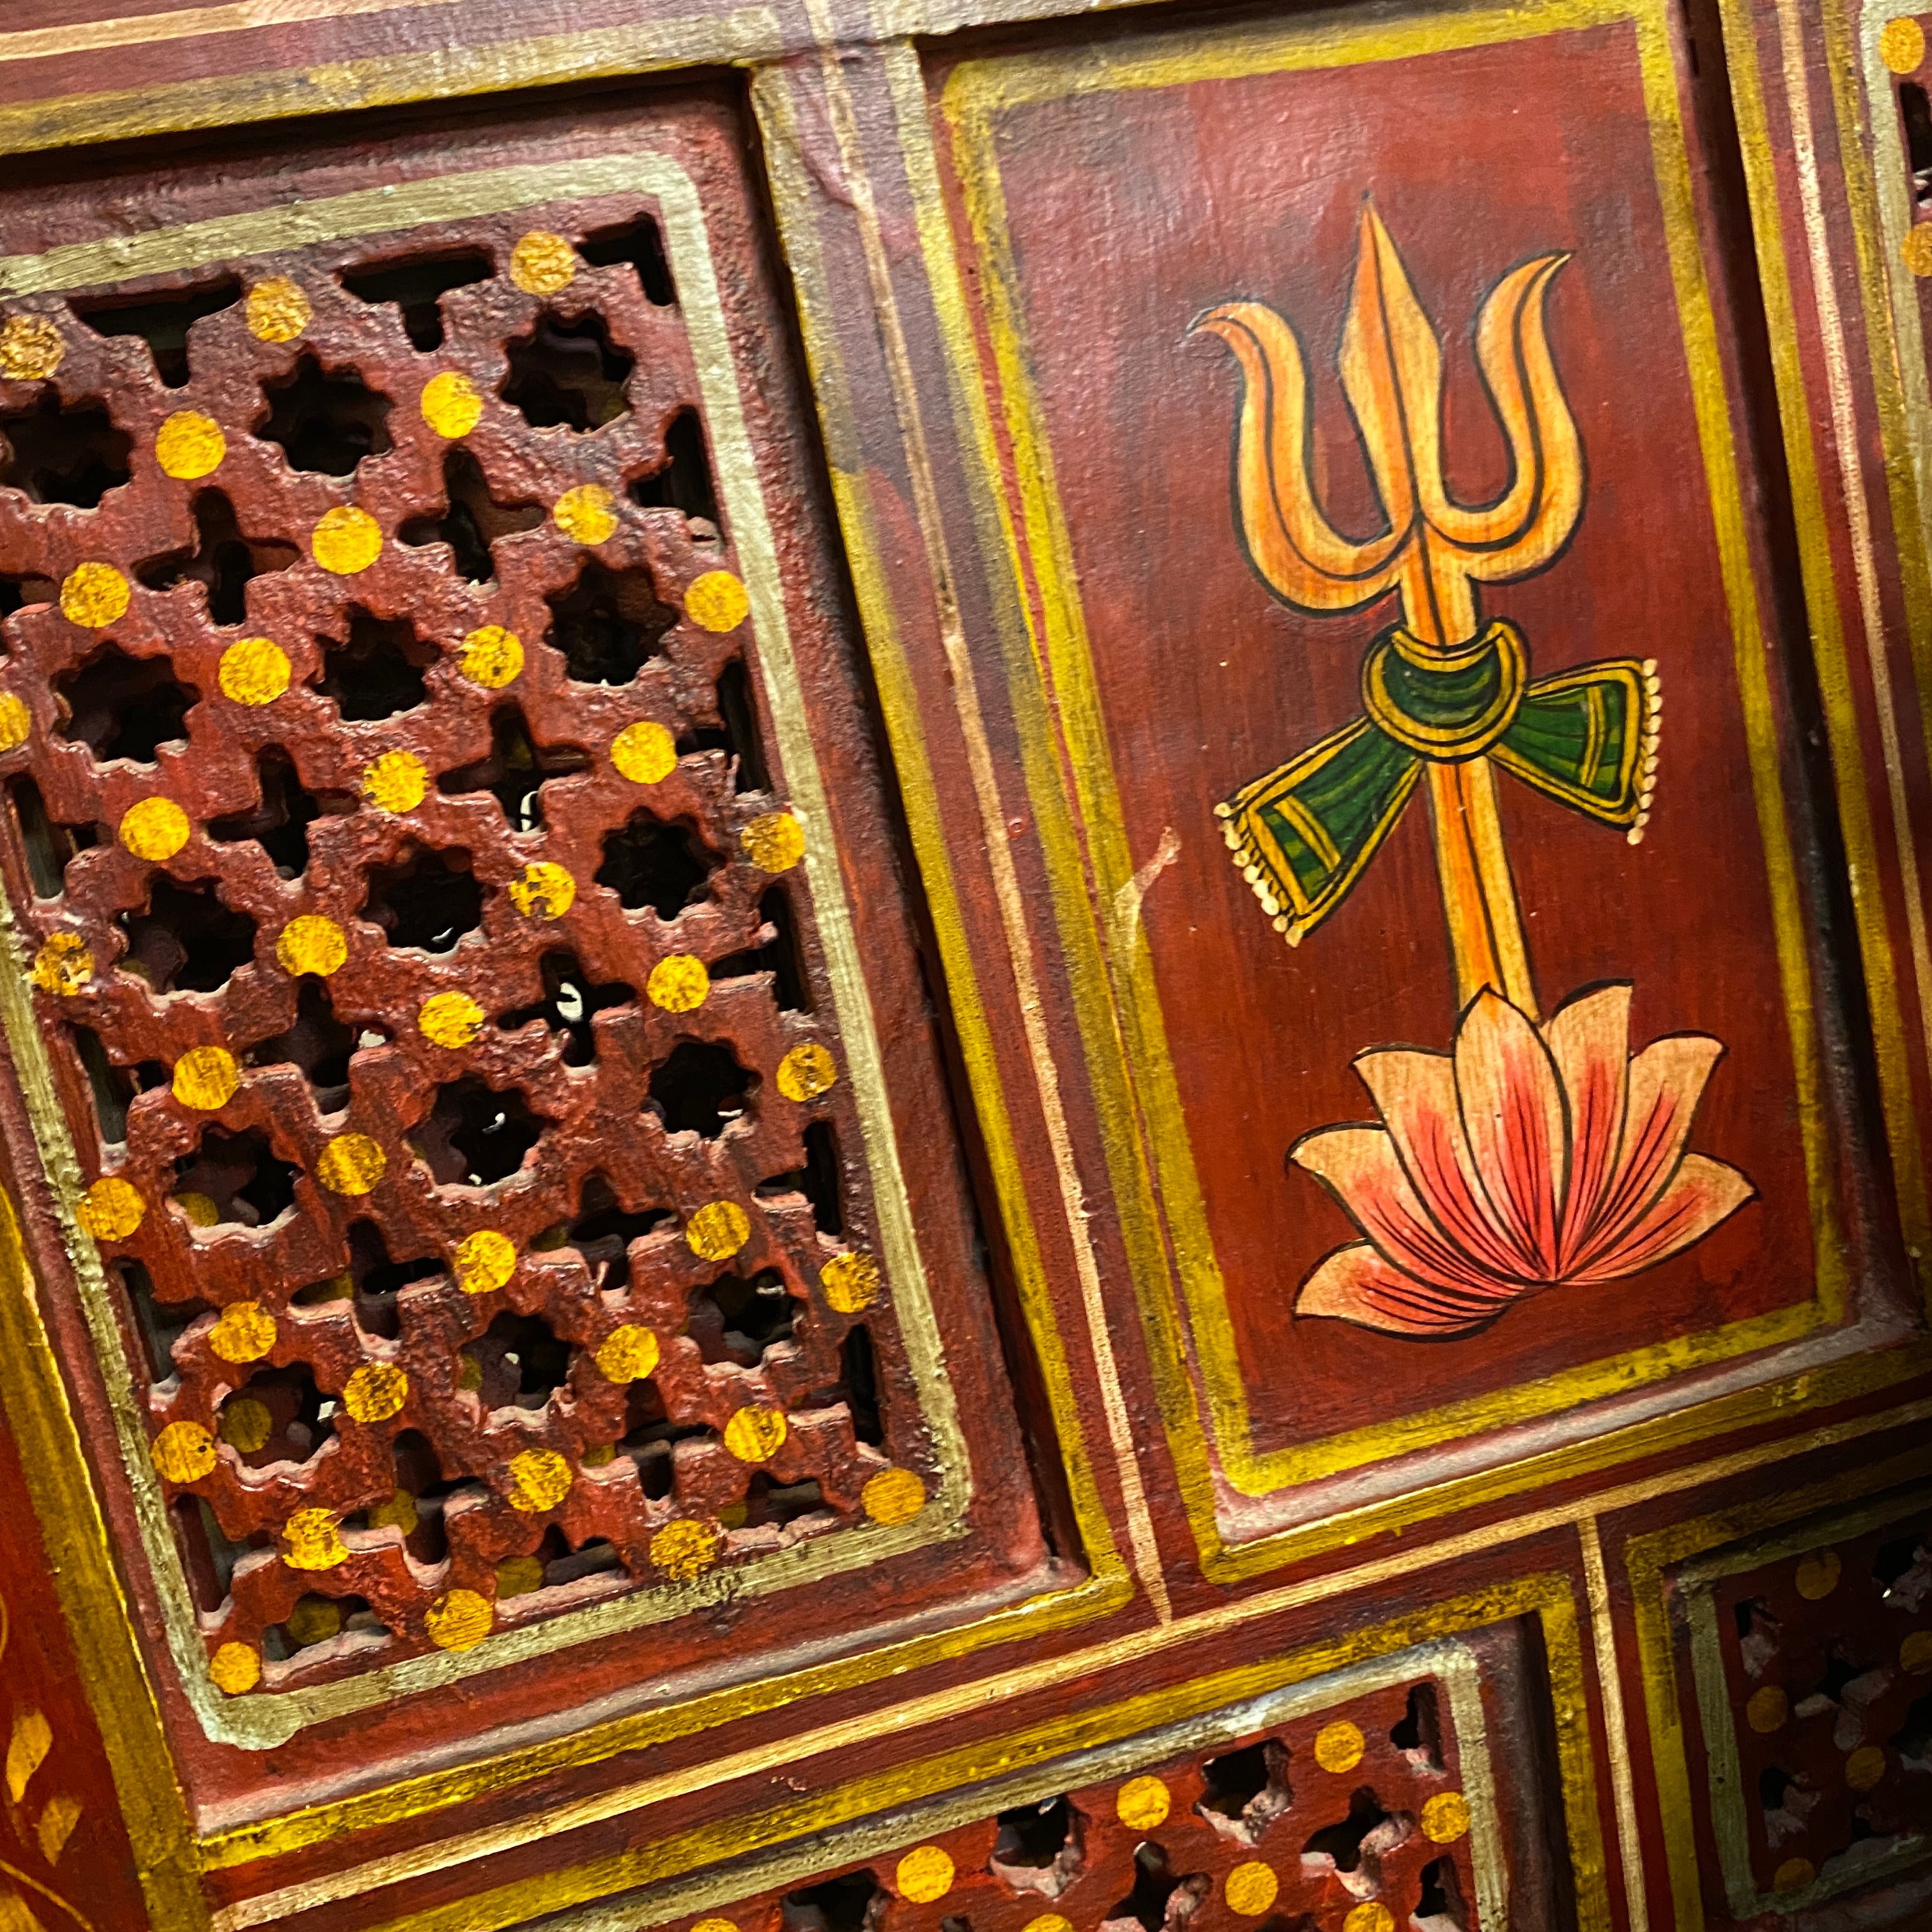 Hand Carved, Hand Painted Wooden Divider - Vintage India NYC